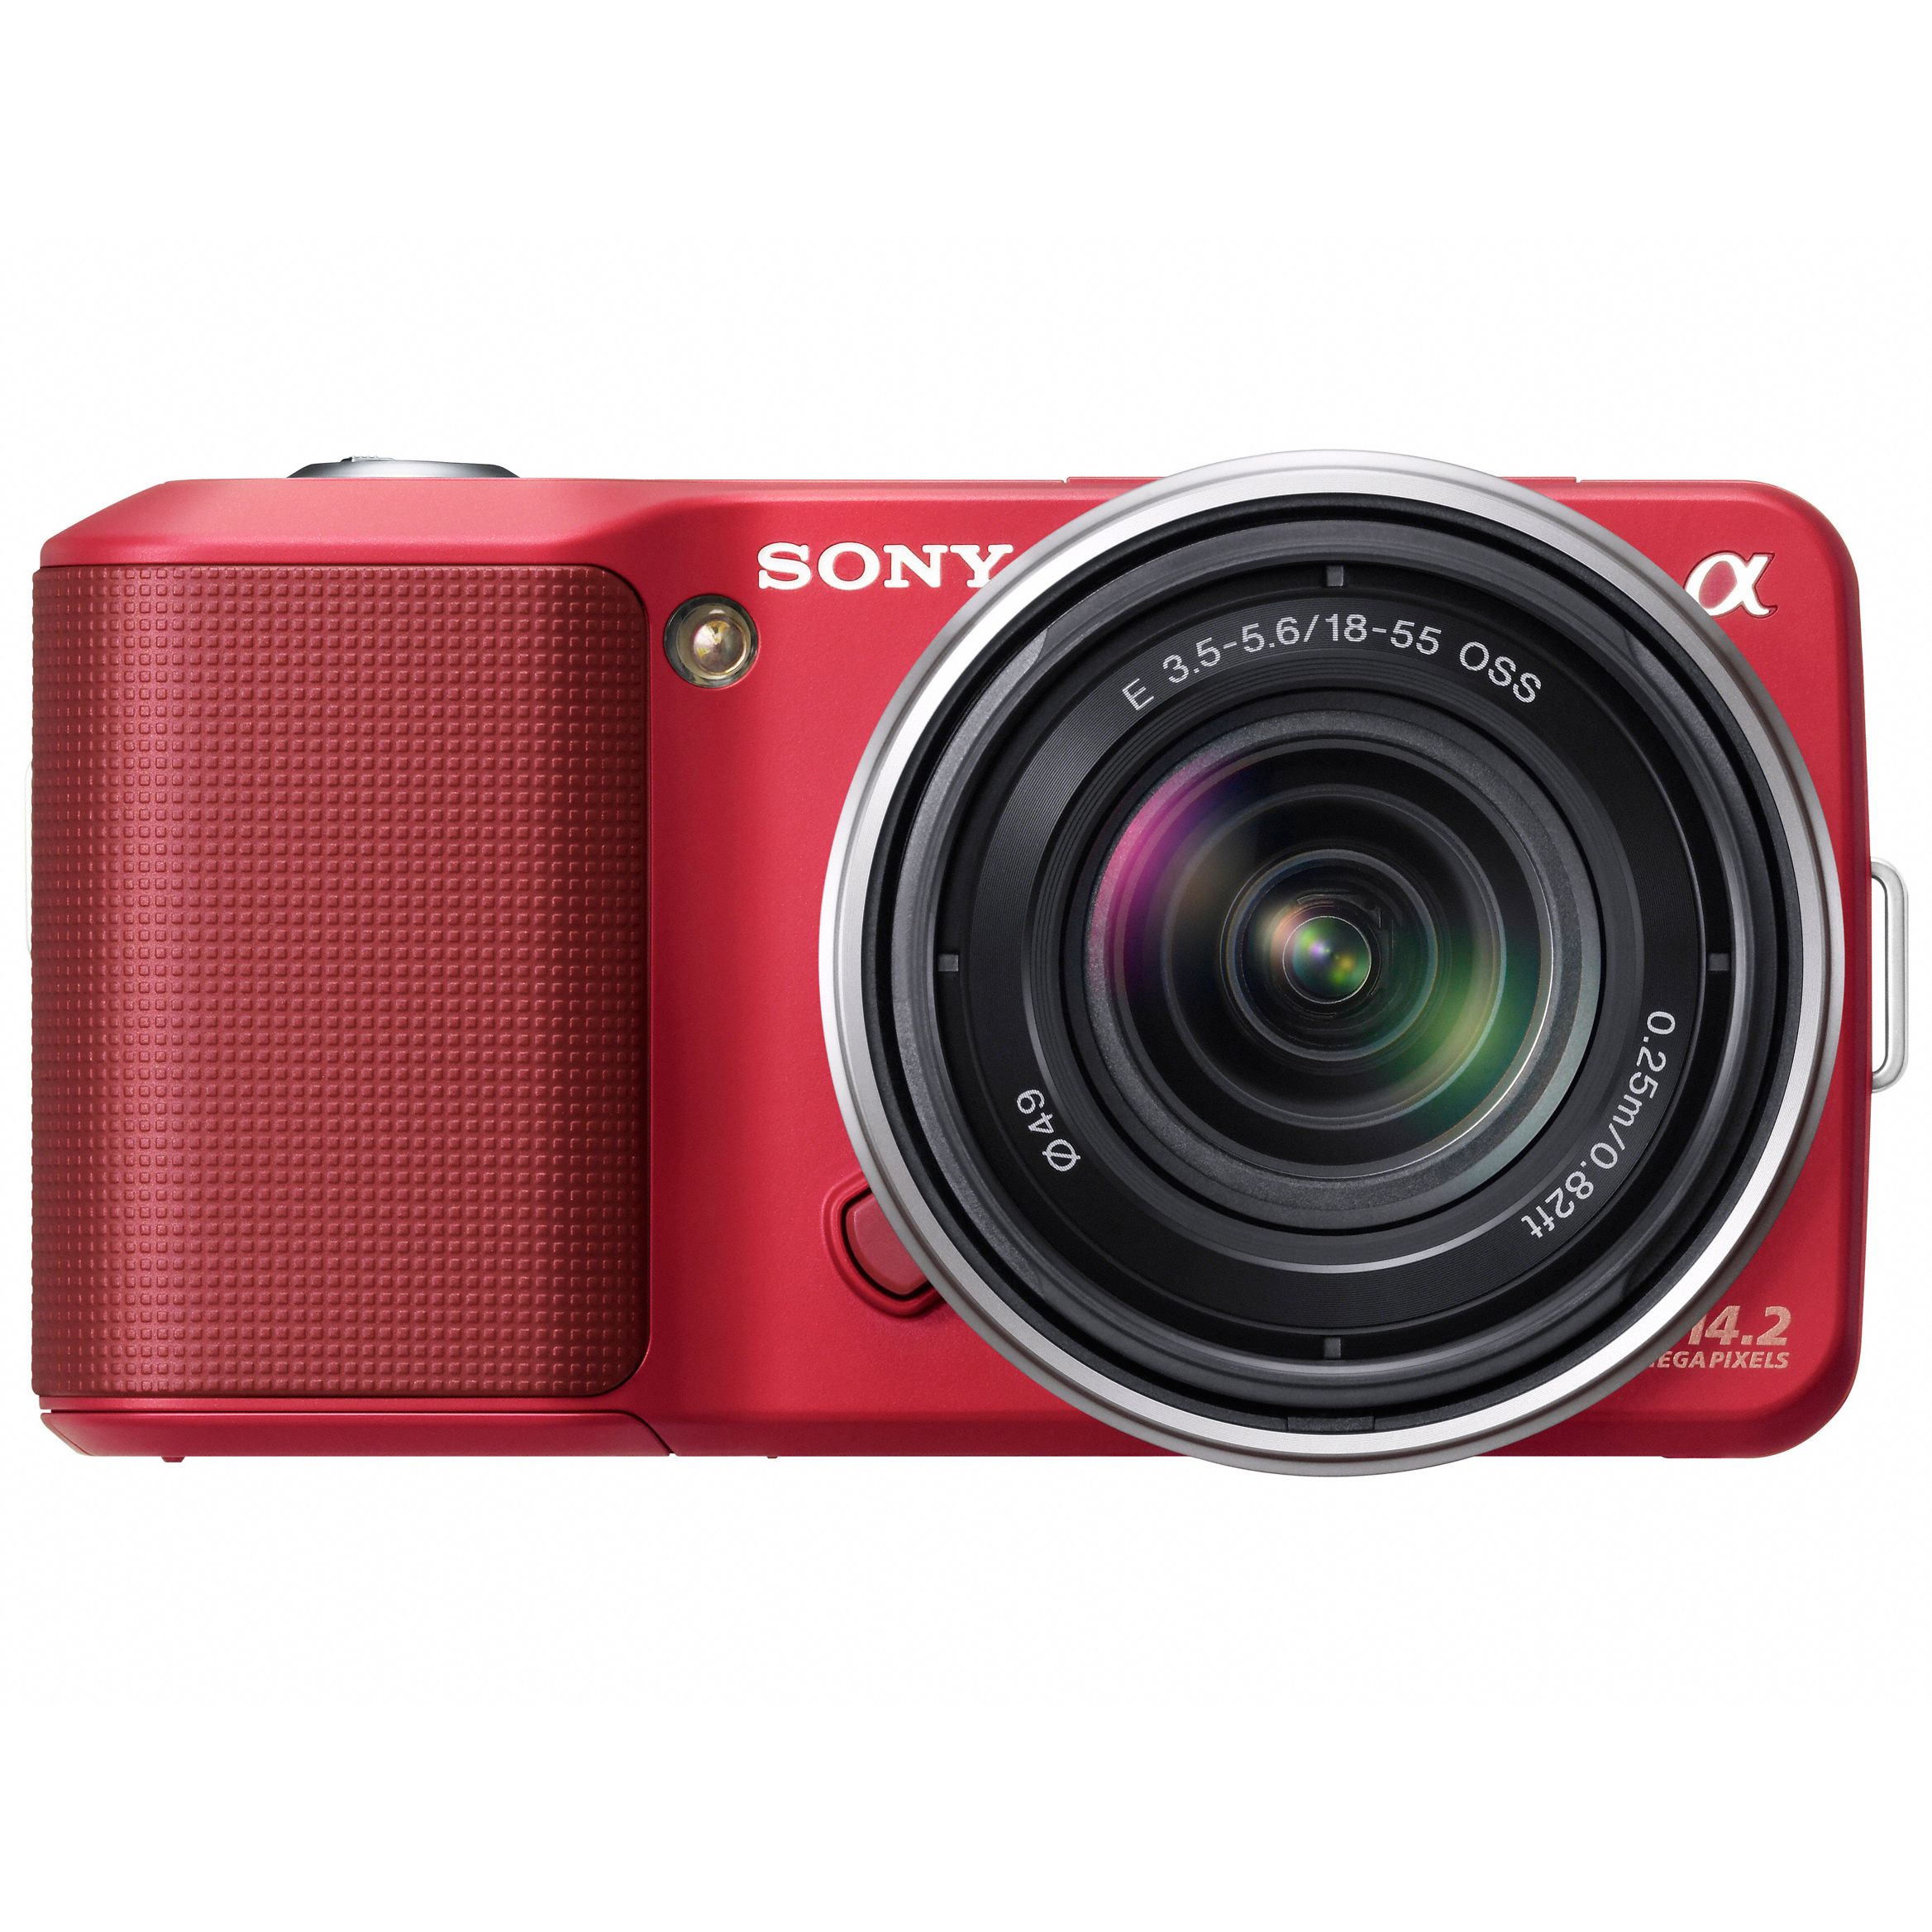 Sony NEX-3 Compact Digital SLR Camera with 18-55mm Lens, Red at John Lewis